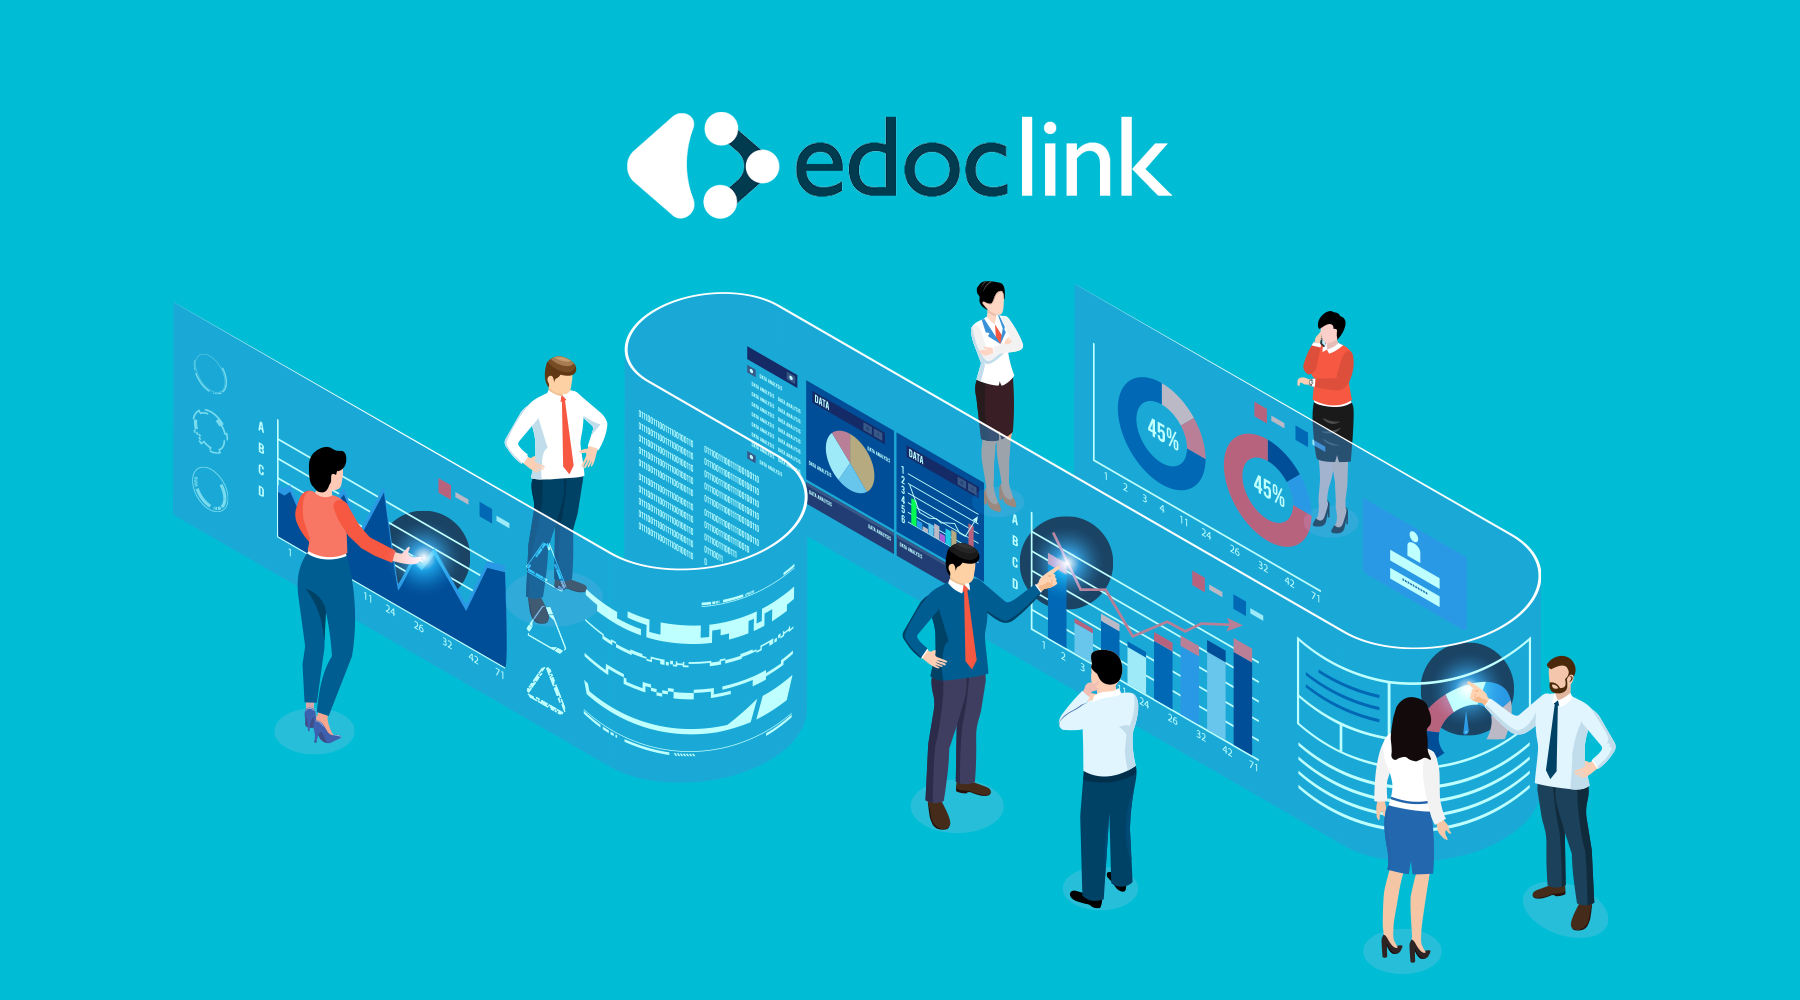 Scanning is now easier, introducing new modules of edoclink